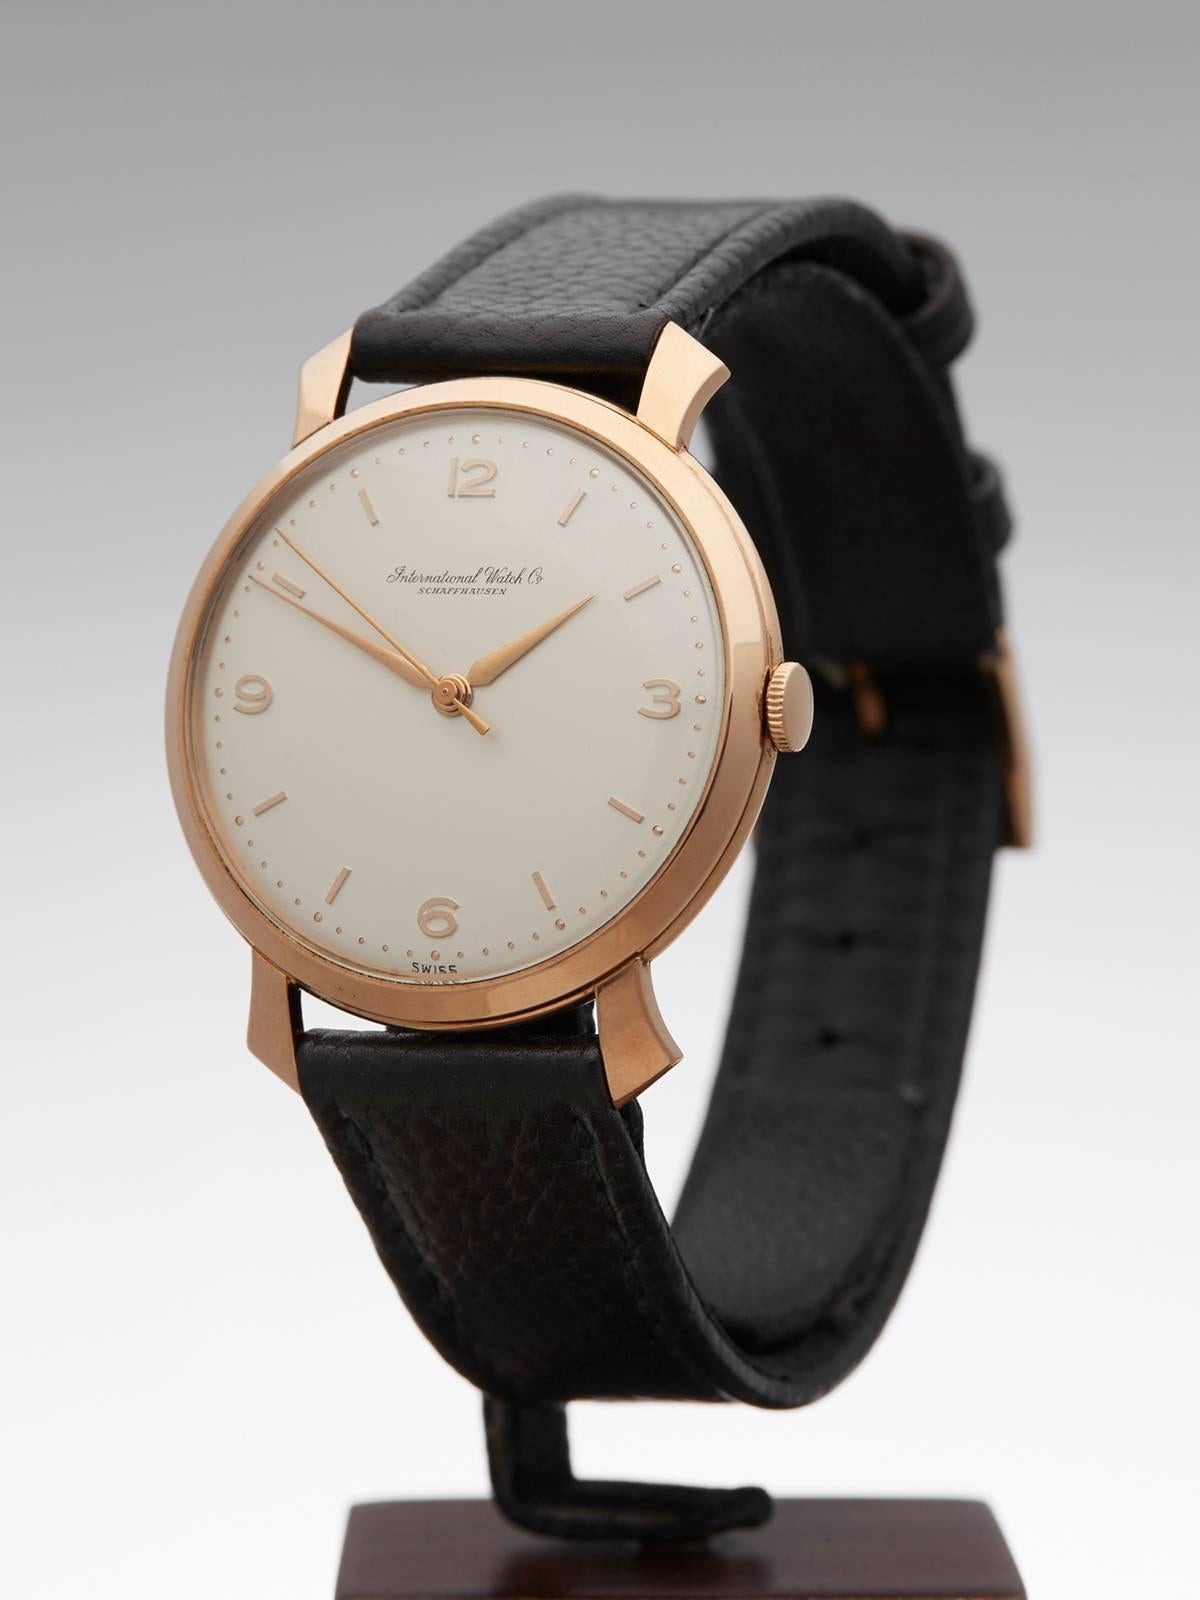 Ref: COM784
Serial: 146****
Condition: 9 - Excellent condition
Age: 1960's
Case Diameter: 36 mm
Case Size: 36mm
Box and Papers: Box Only
Movement: Mechanical Wind
Case: 18k Rose Gold
Dial: White Baton
Bracelet: Black Leather
Strap Length: Adjustable